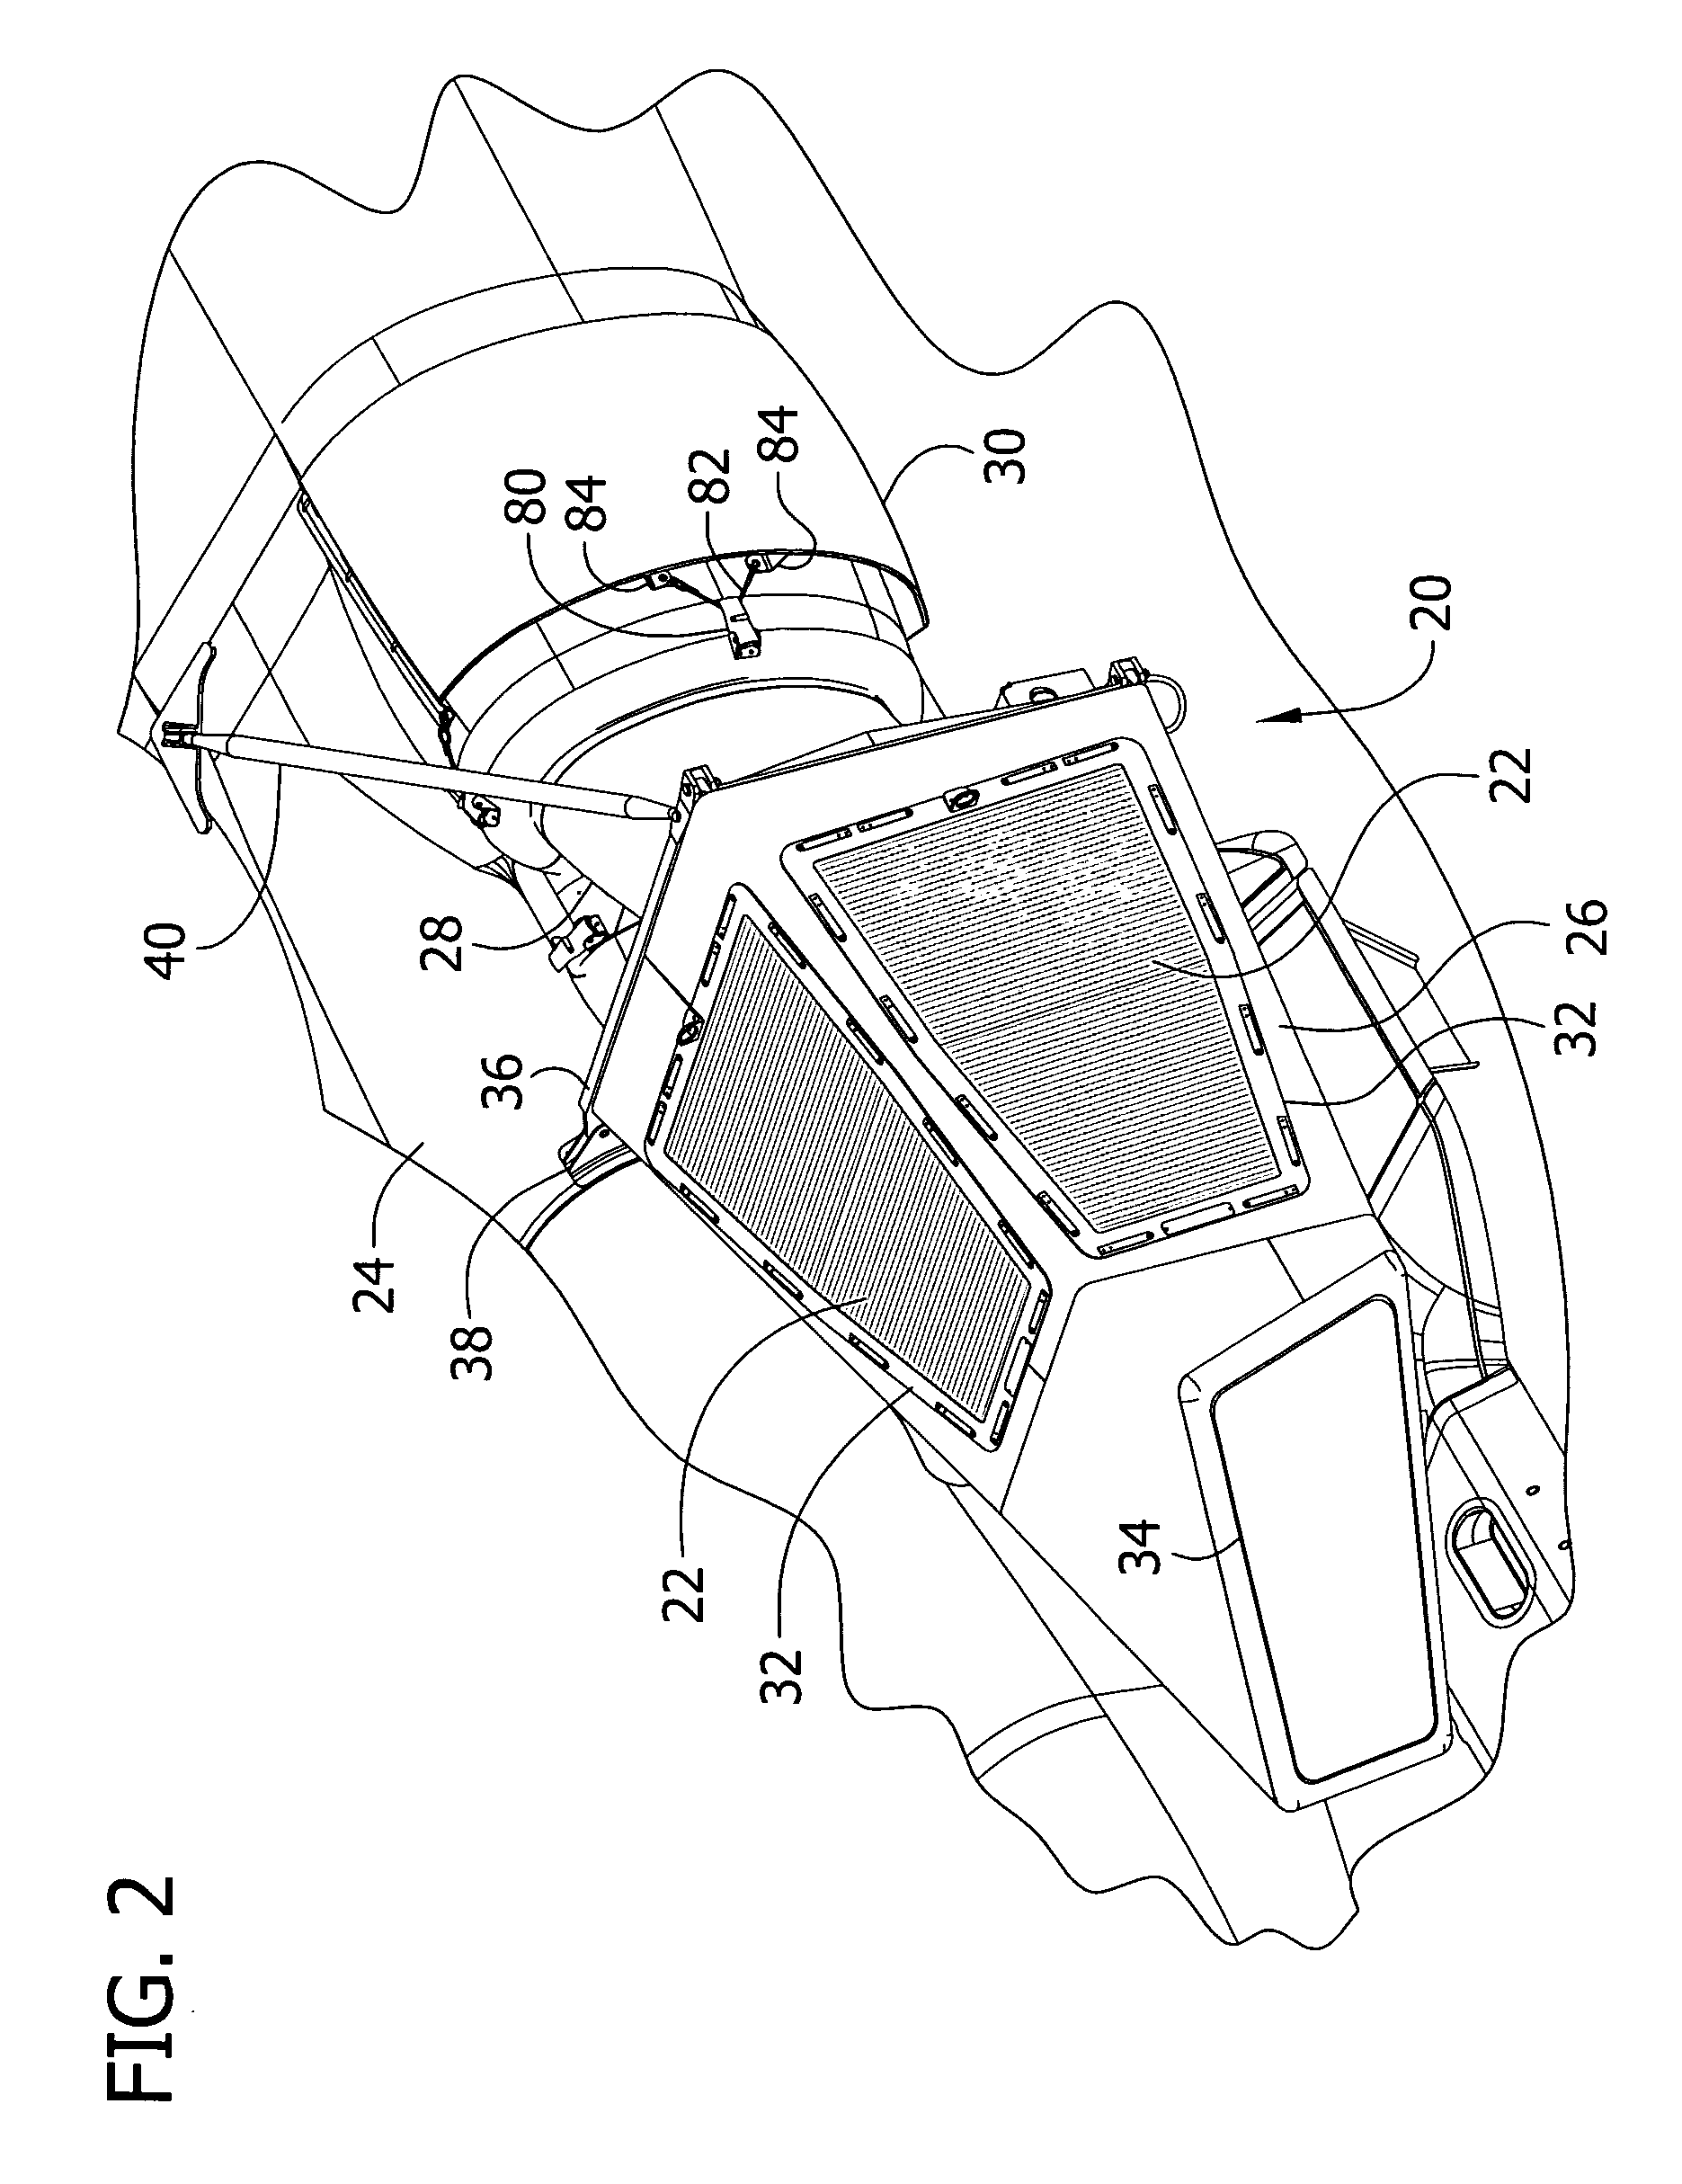 Engine air filter and sealing system